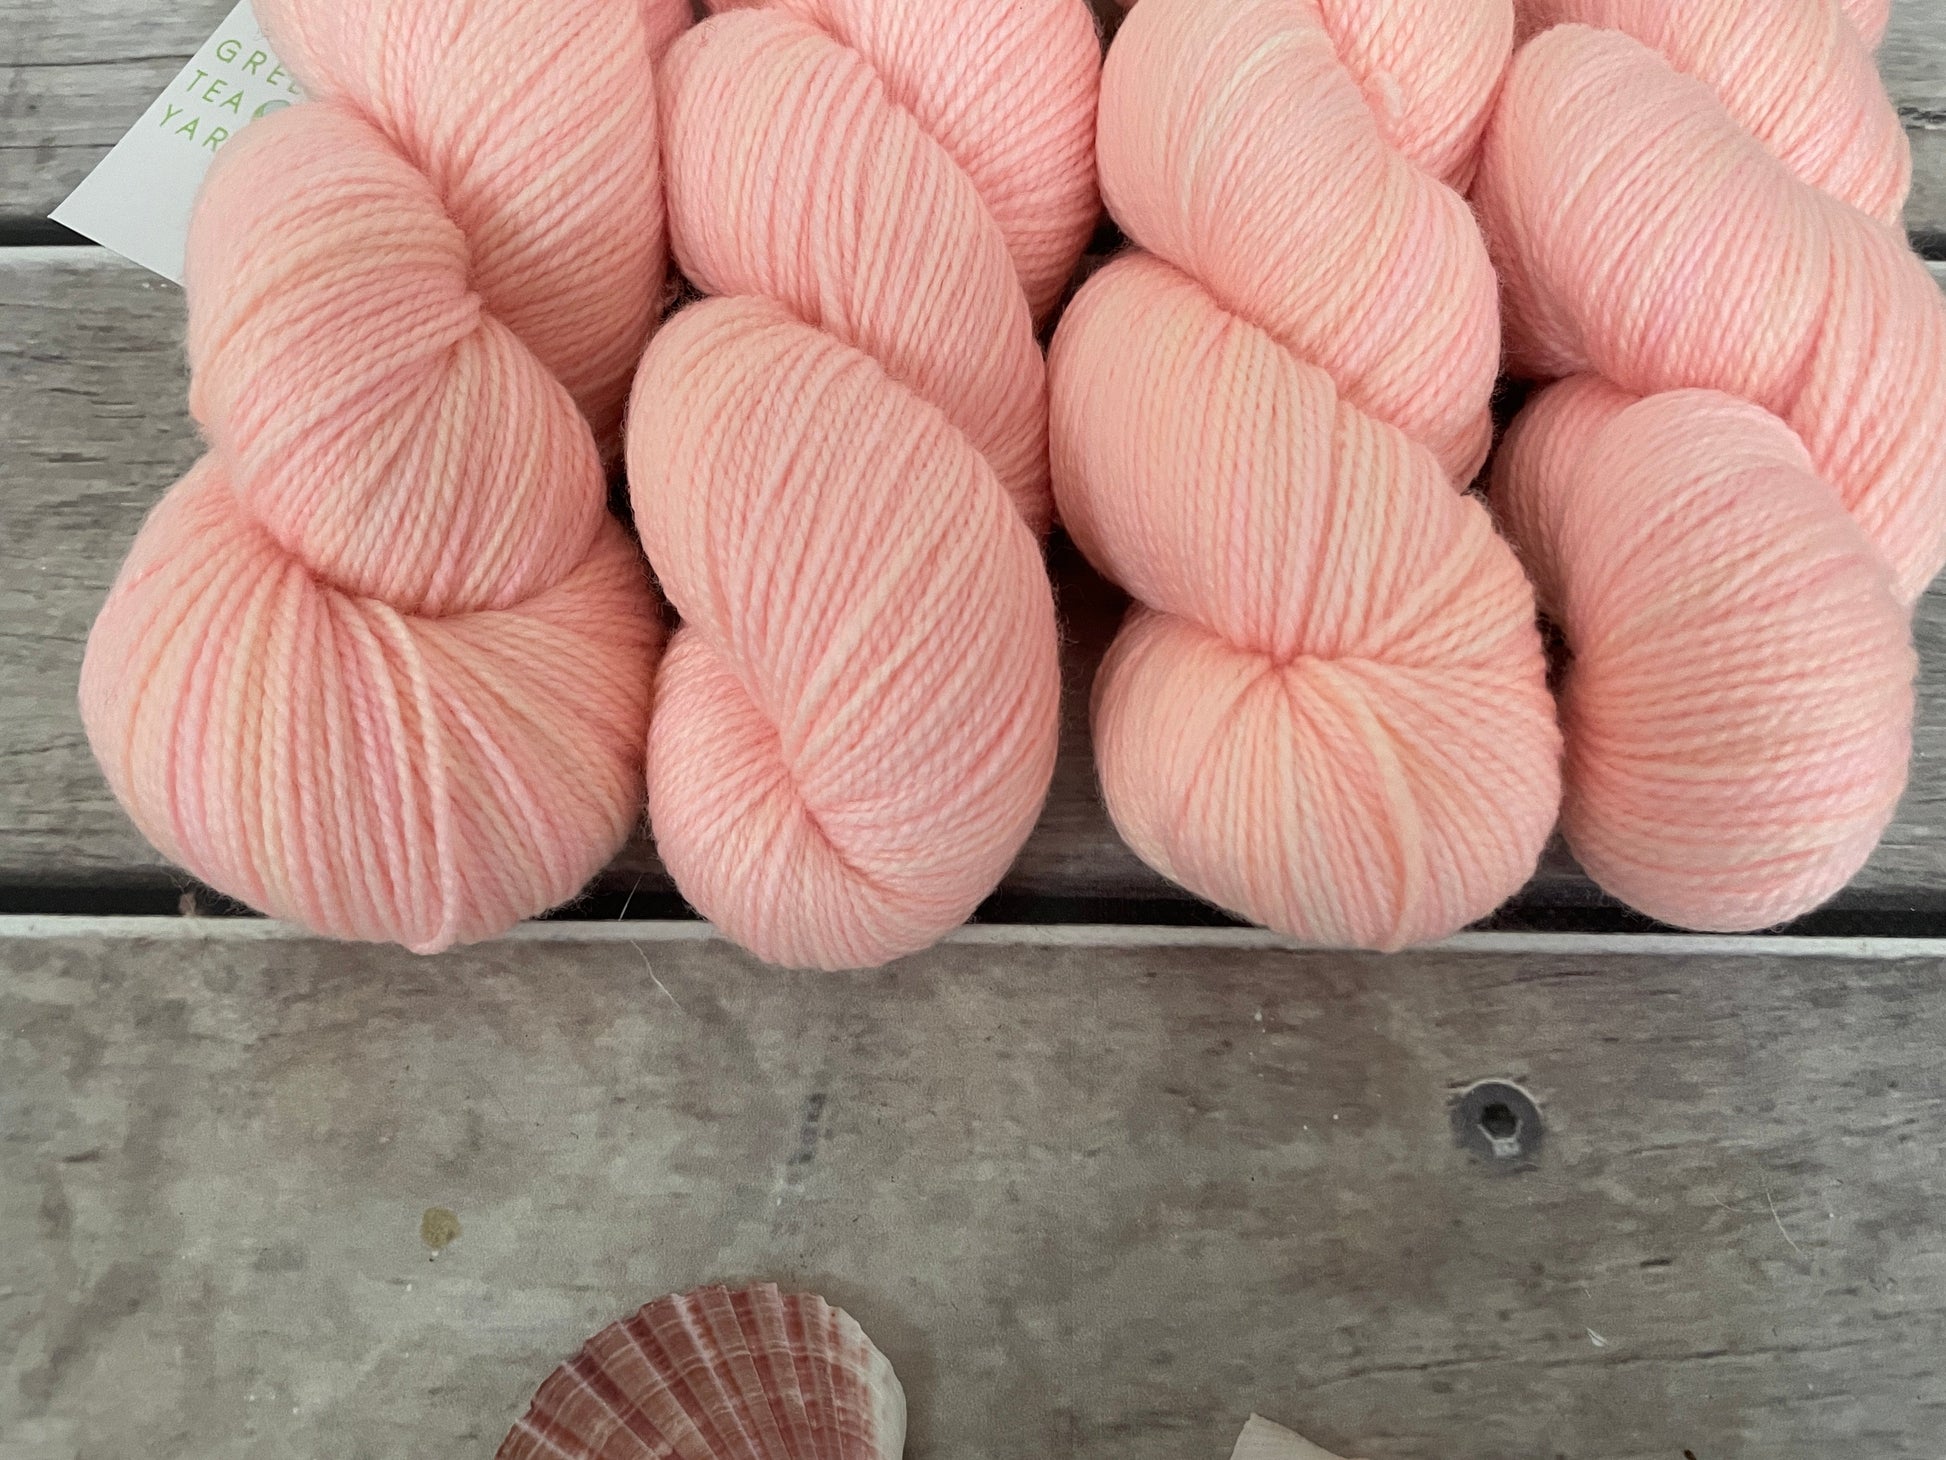 A soft pastel peach colour yarn sits on some wooden planks